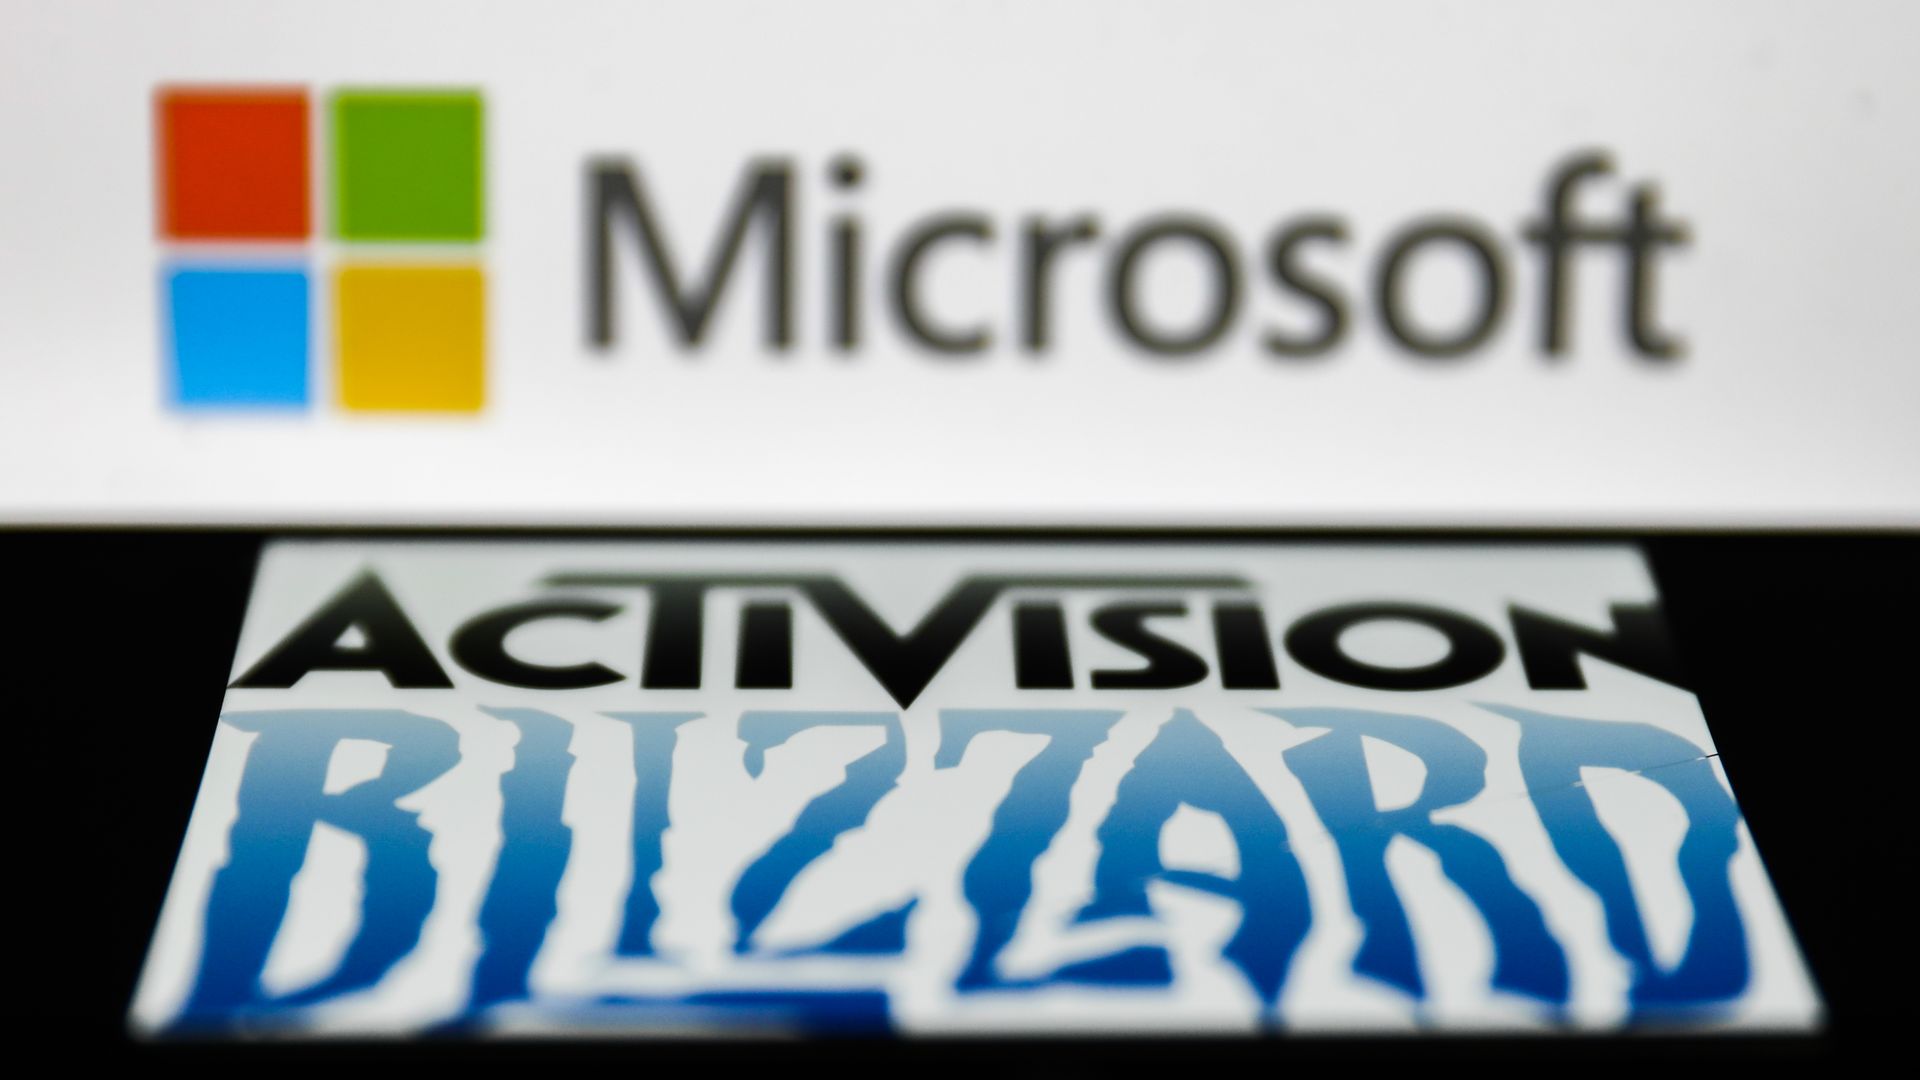 Photo of logos for Microsoft, Activision and Blizzard